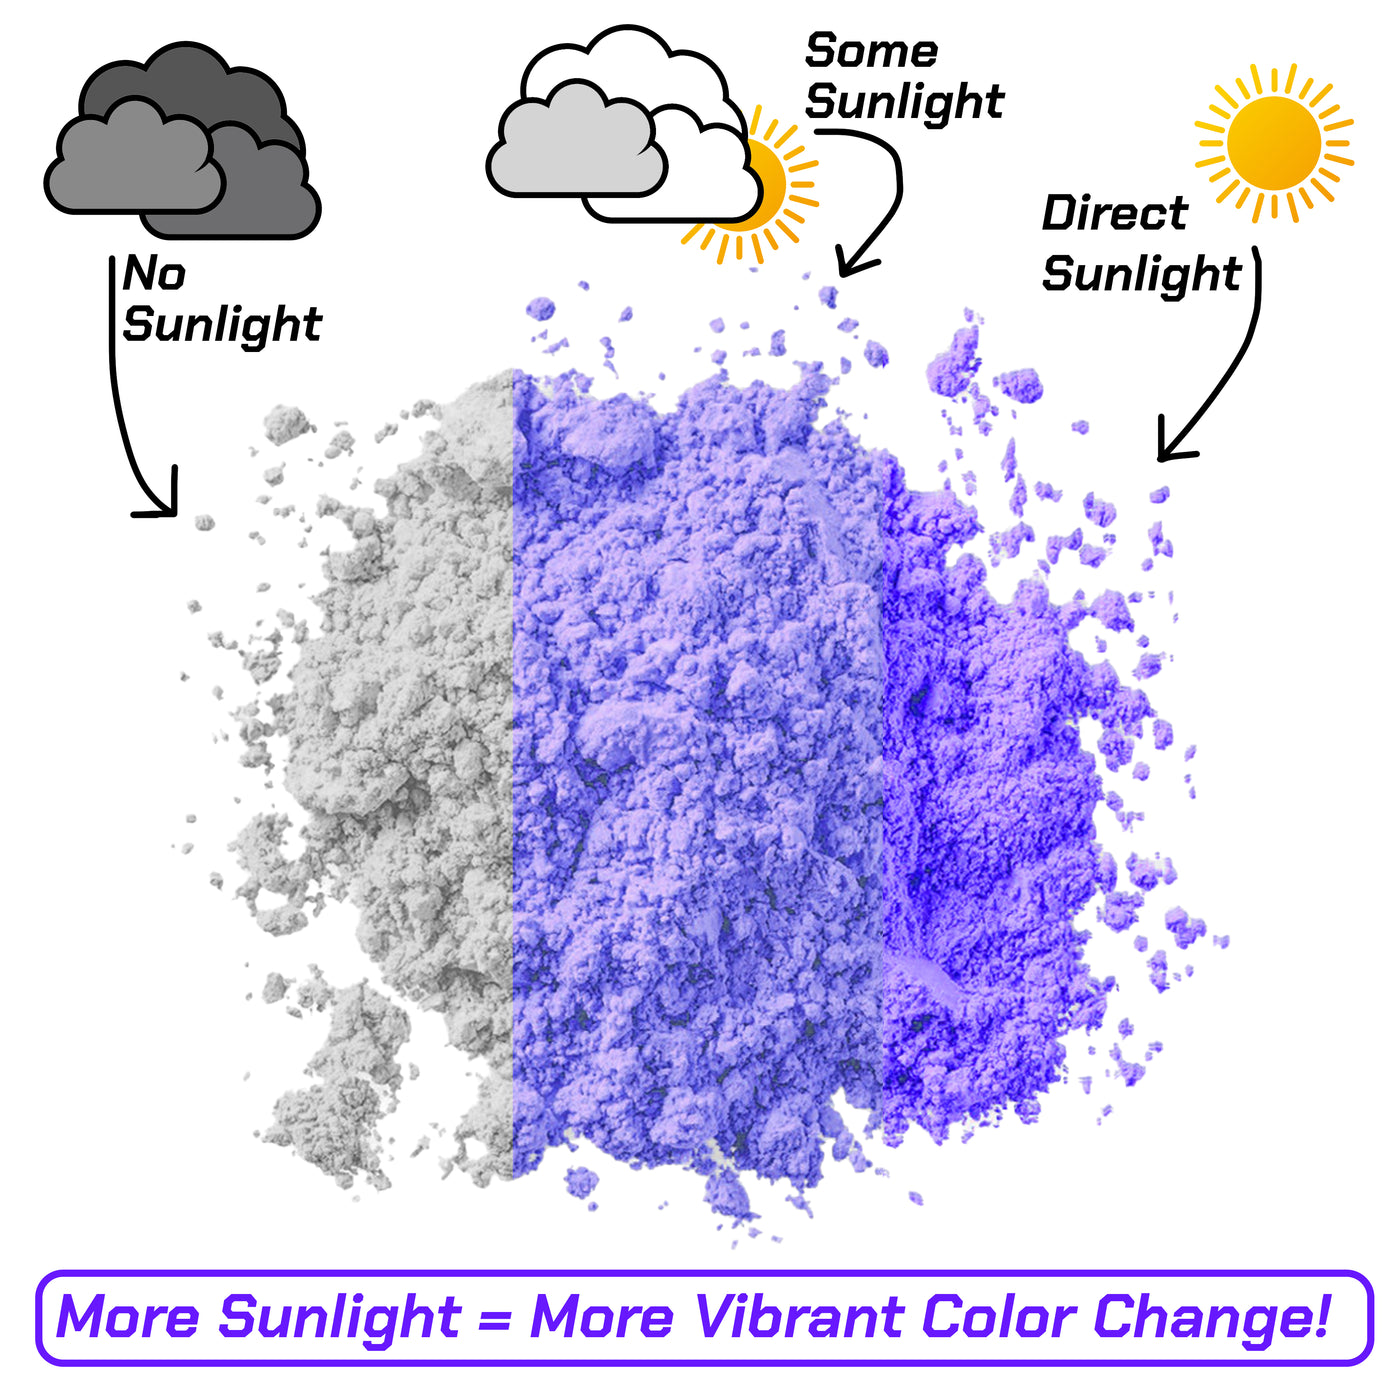 White to Purple - Photochromic Pigment Powder (Changes Color In Sunlight)